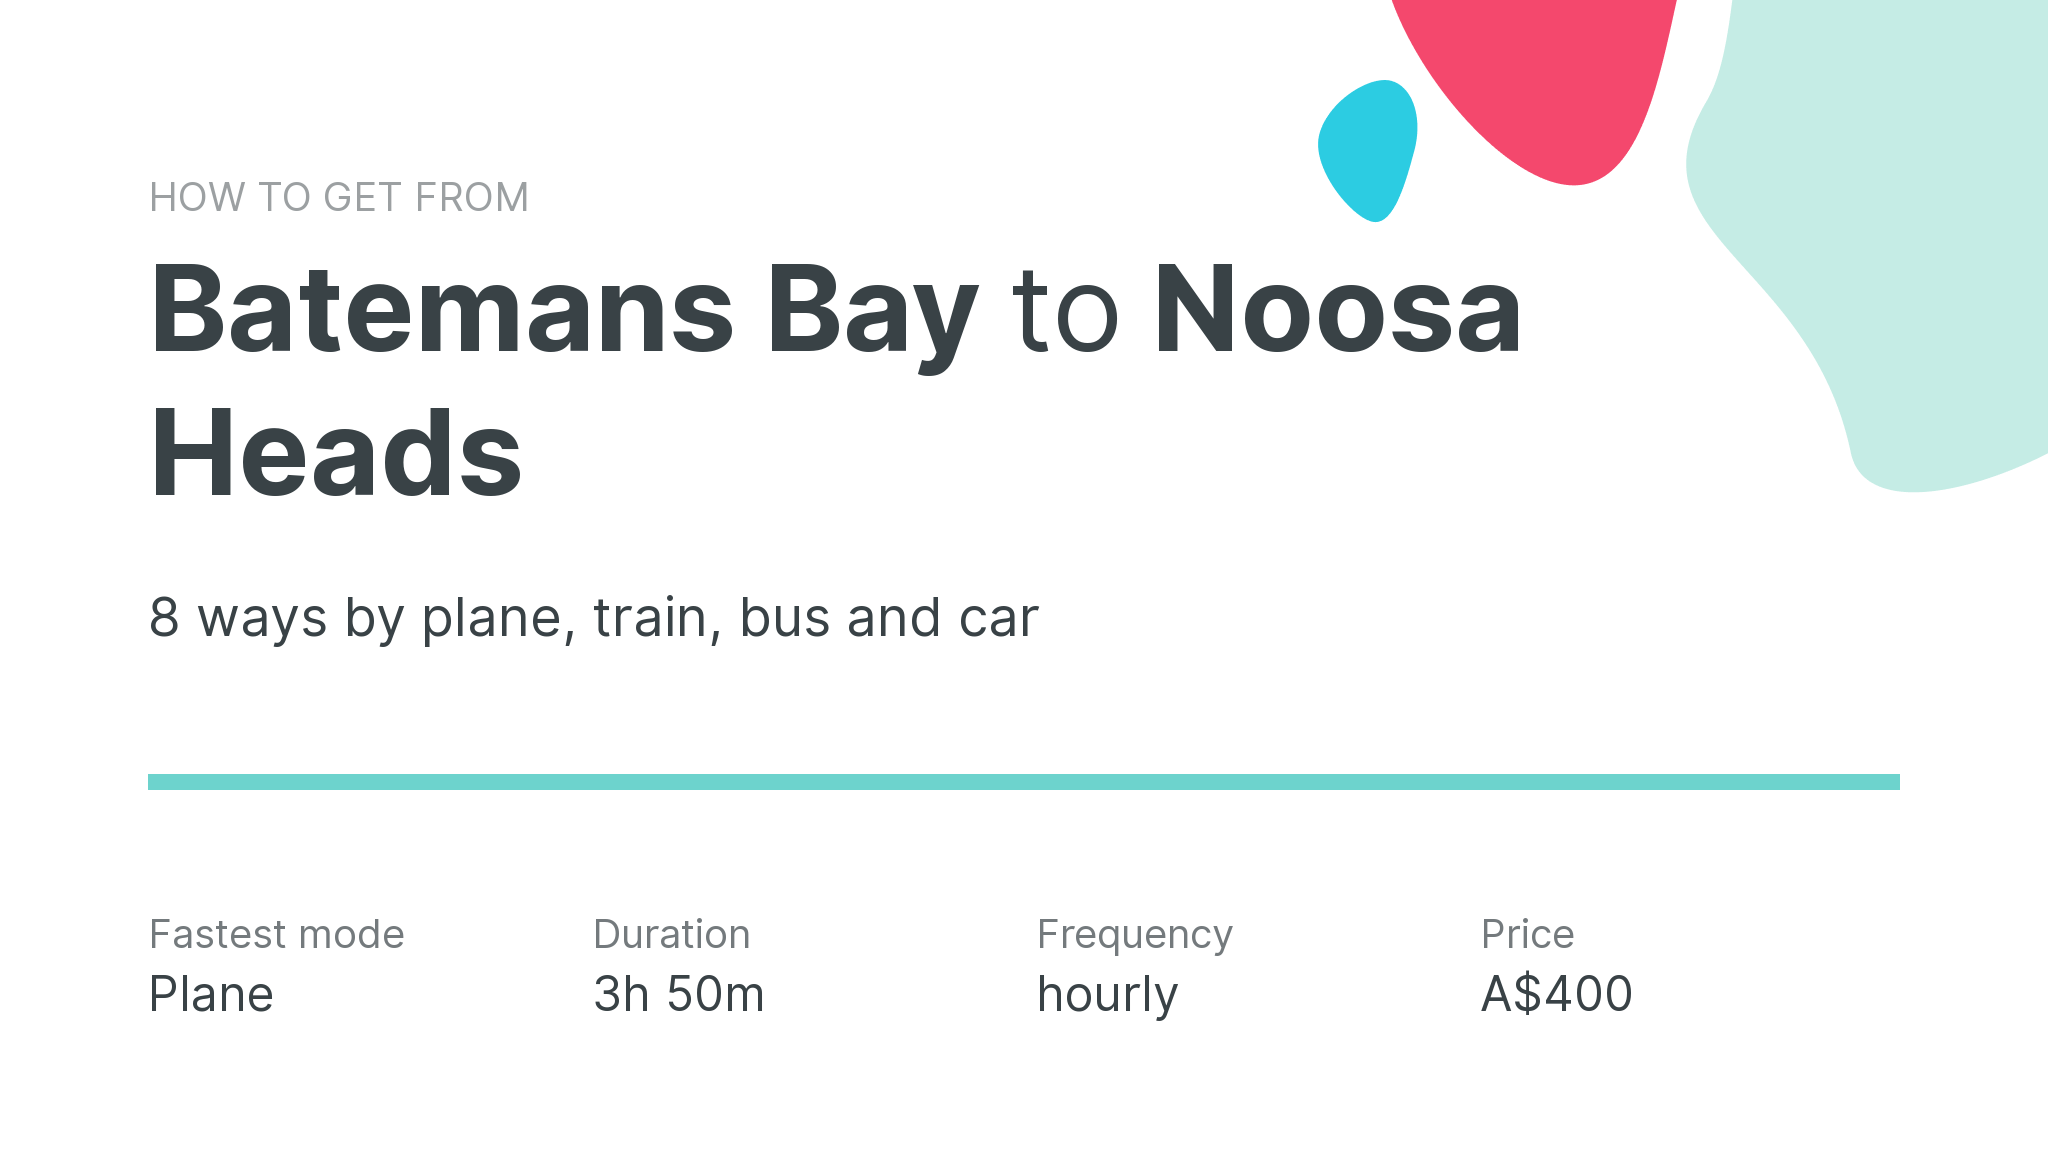 How do I get from Batemans Bay to Noosa Heads